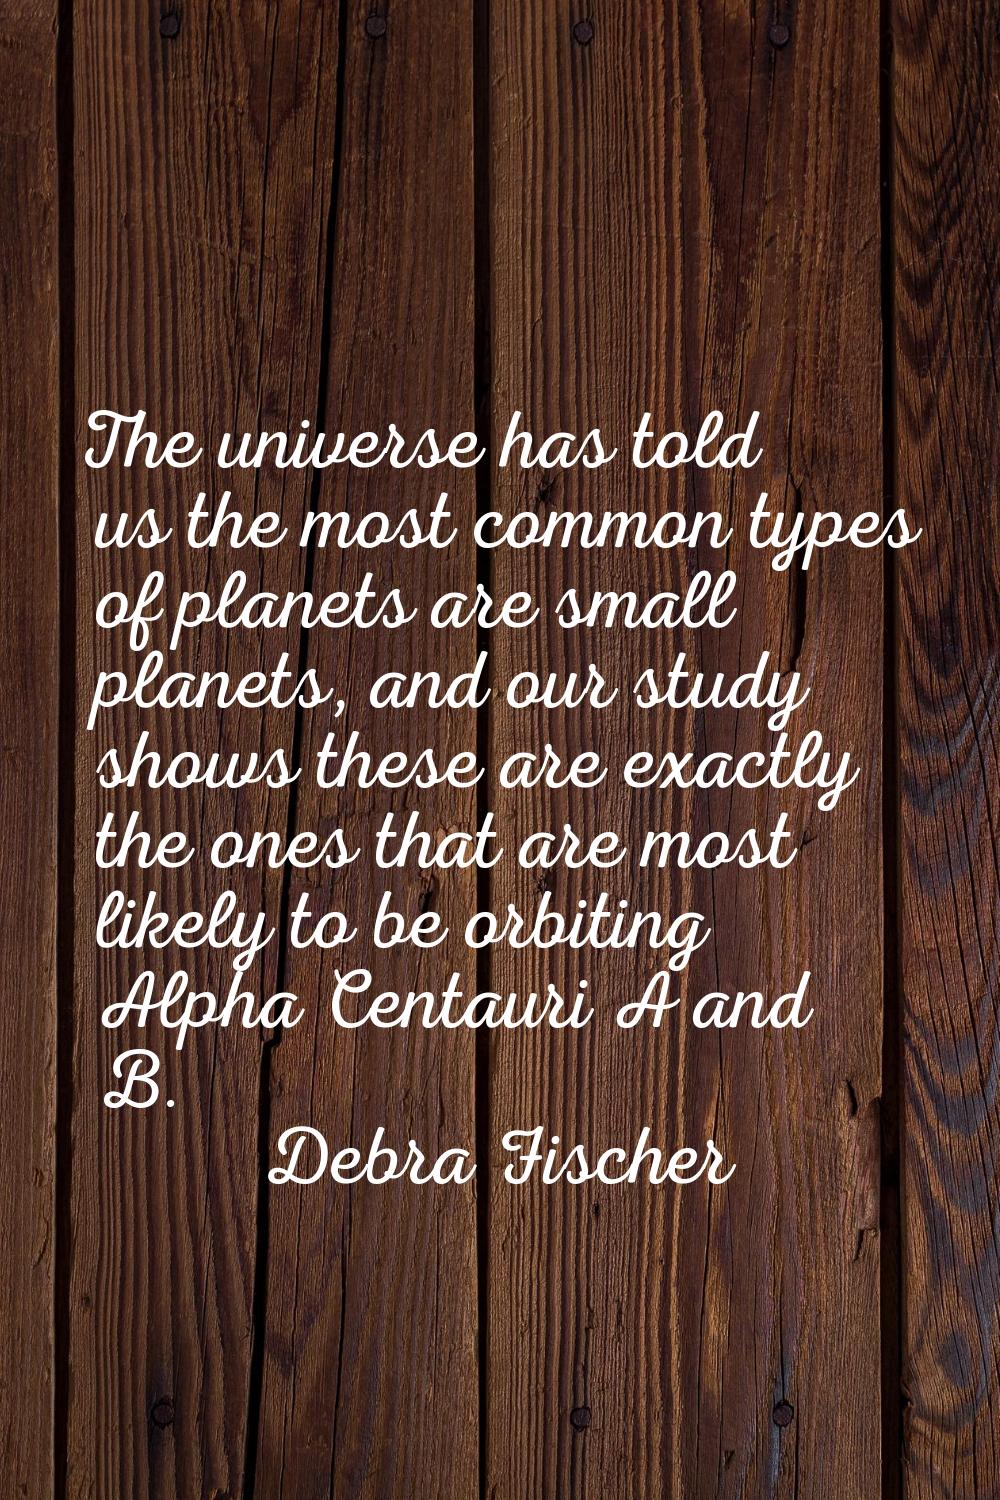 The universe has told us the most common types of planets are small planets, and our study shows th